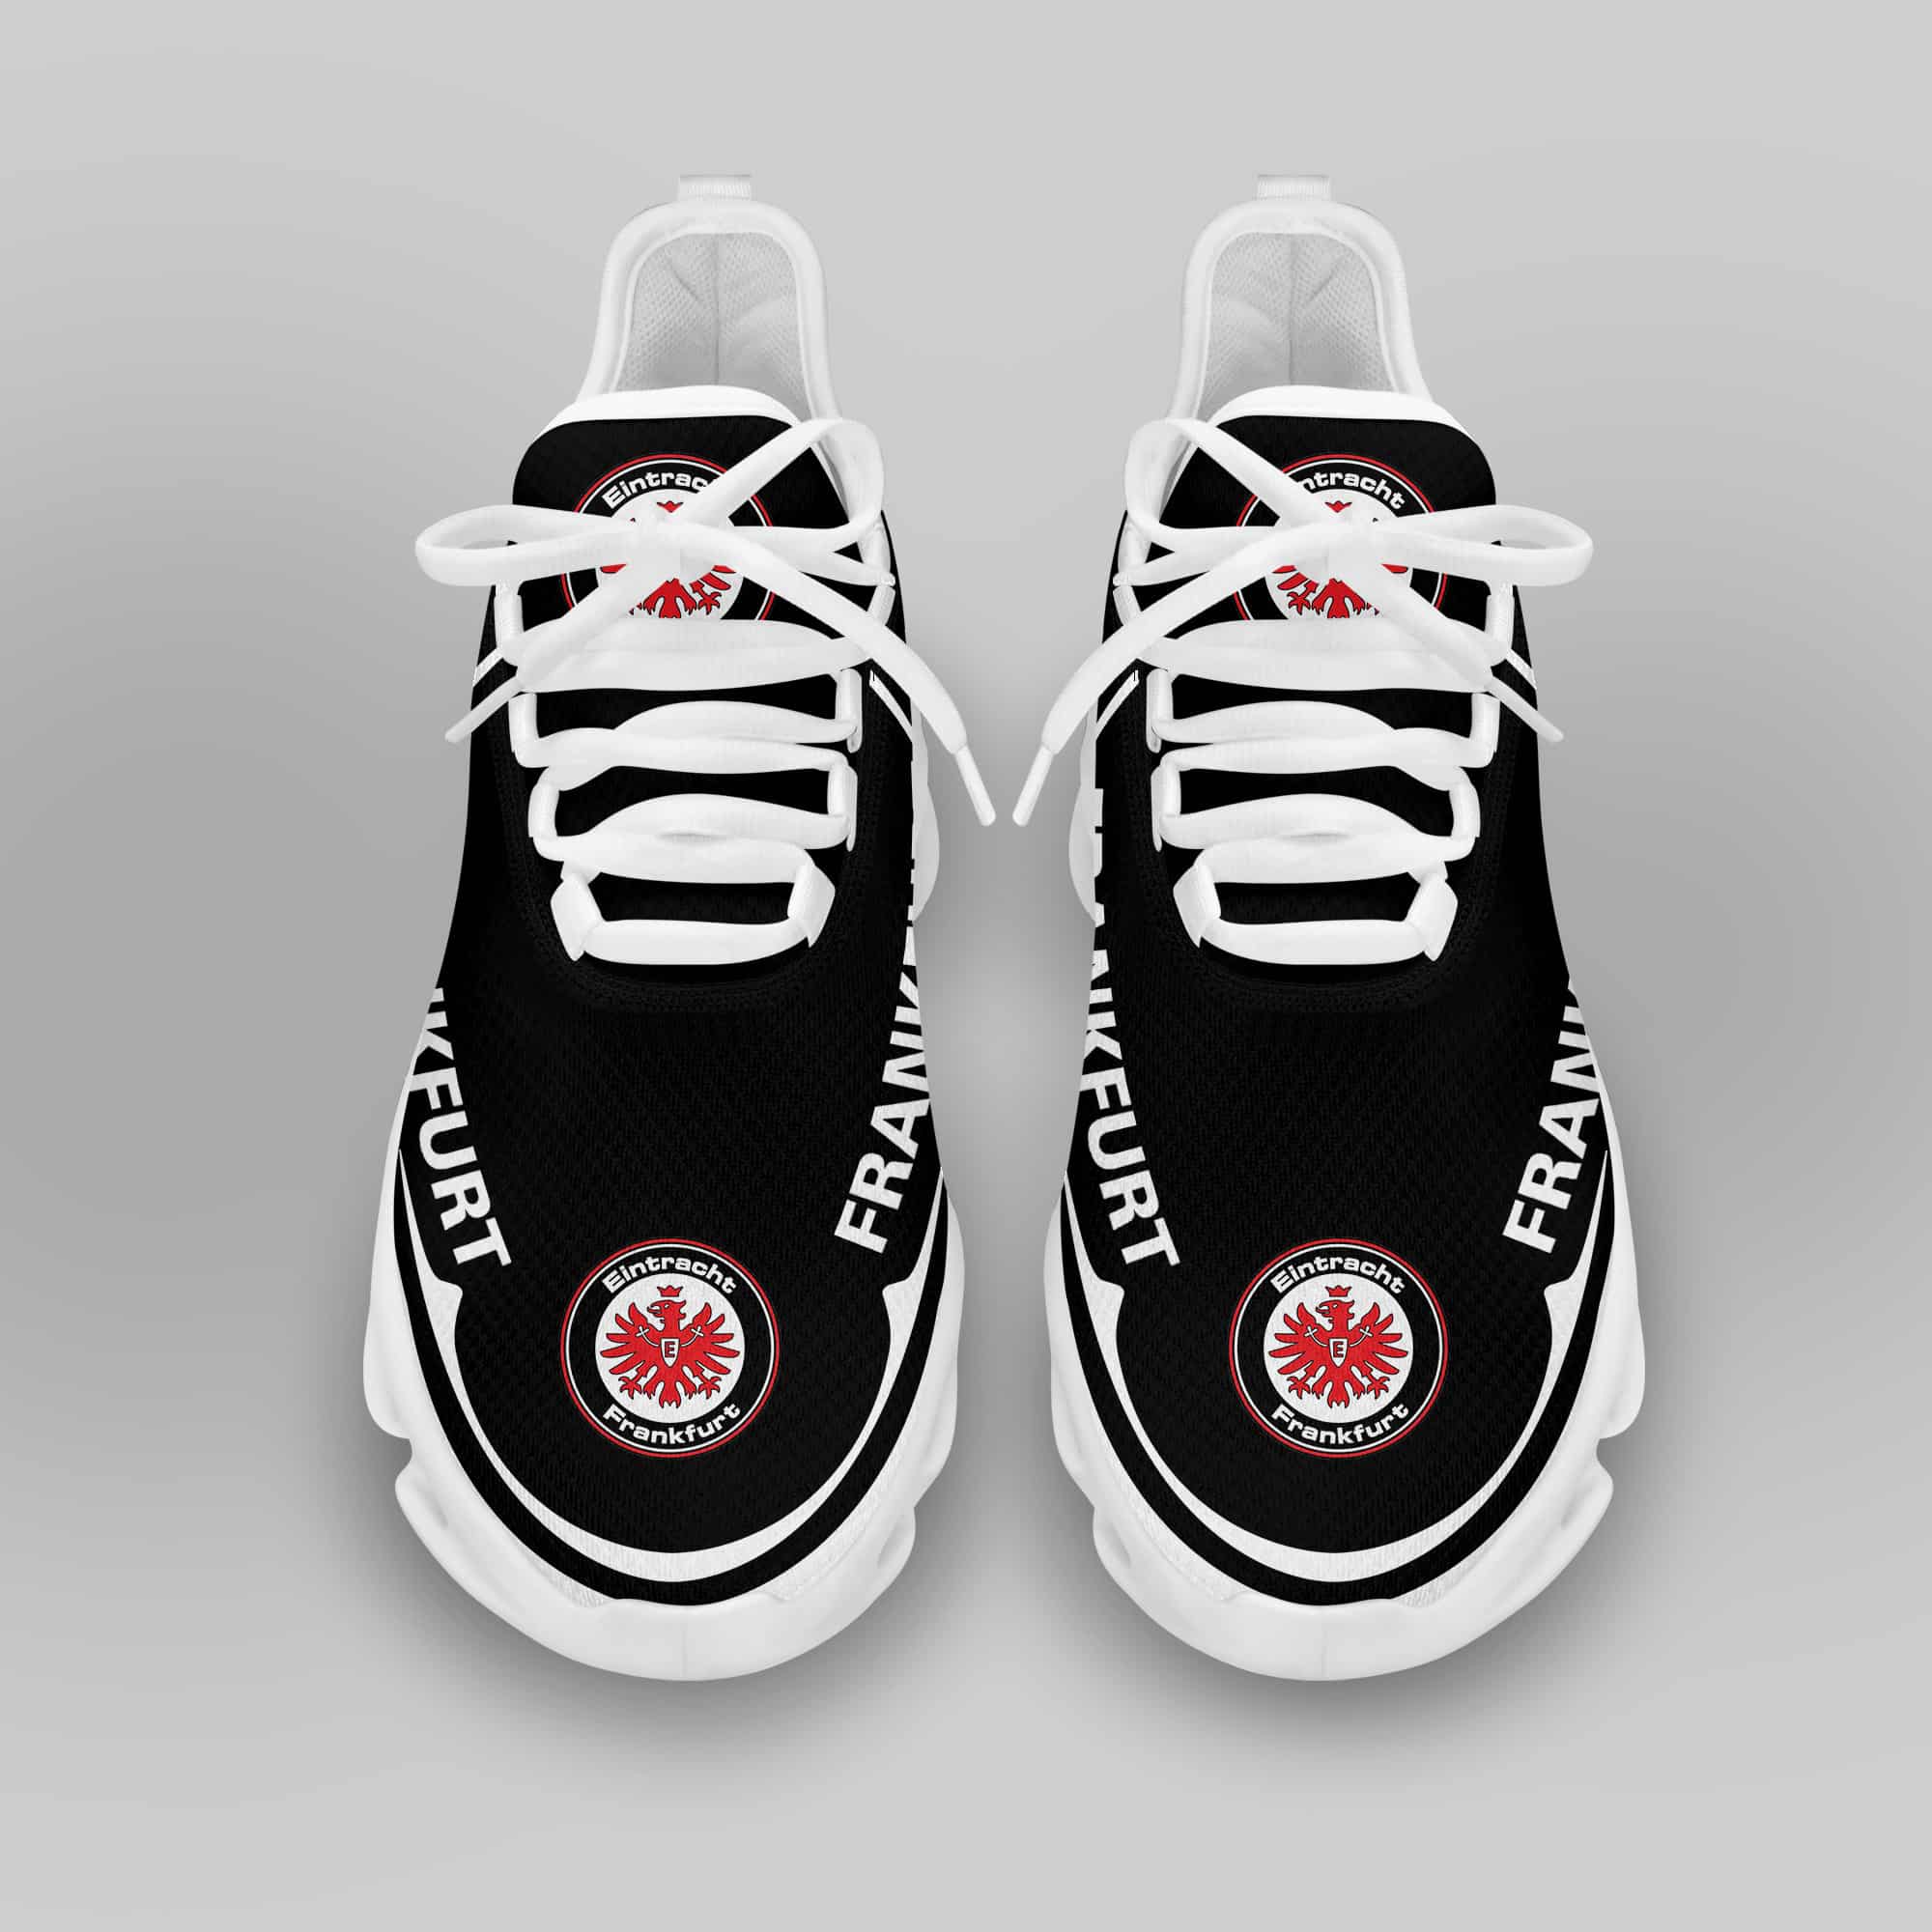 Eintracht Frankfurt Running Shoes Max Soul Shoes Sneakers Ver 21 3